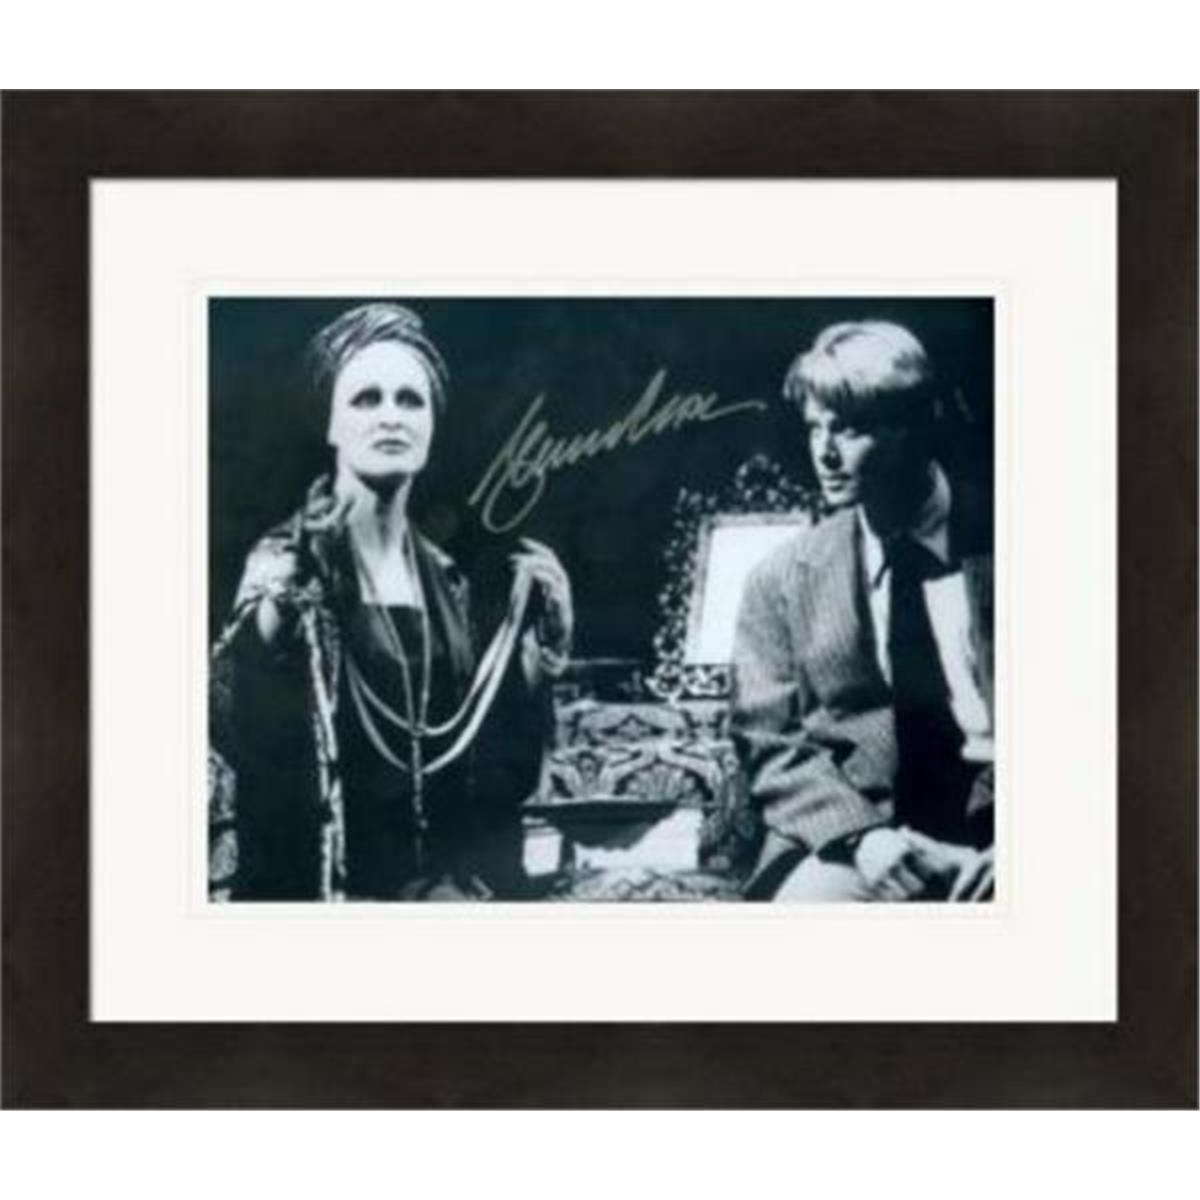 388054 8 x 10 in. Glenn Close Autographed Photo B & W Matted & Framed -  Autograph Warehouse